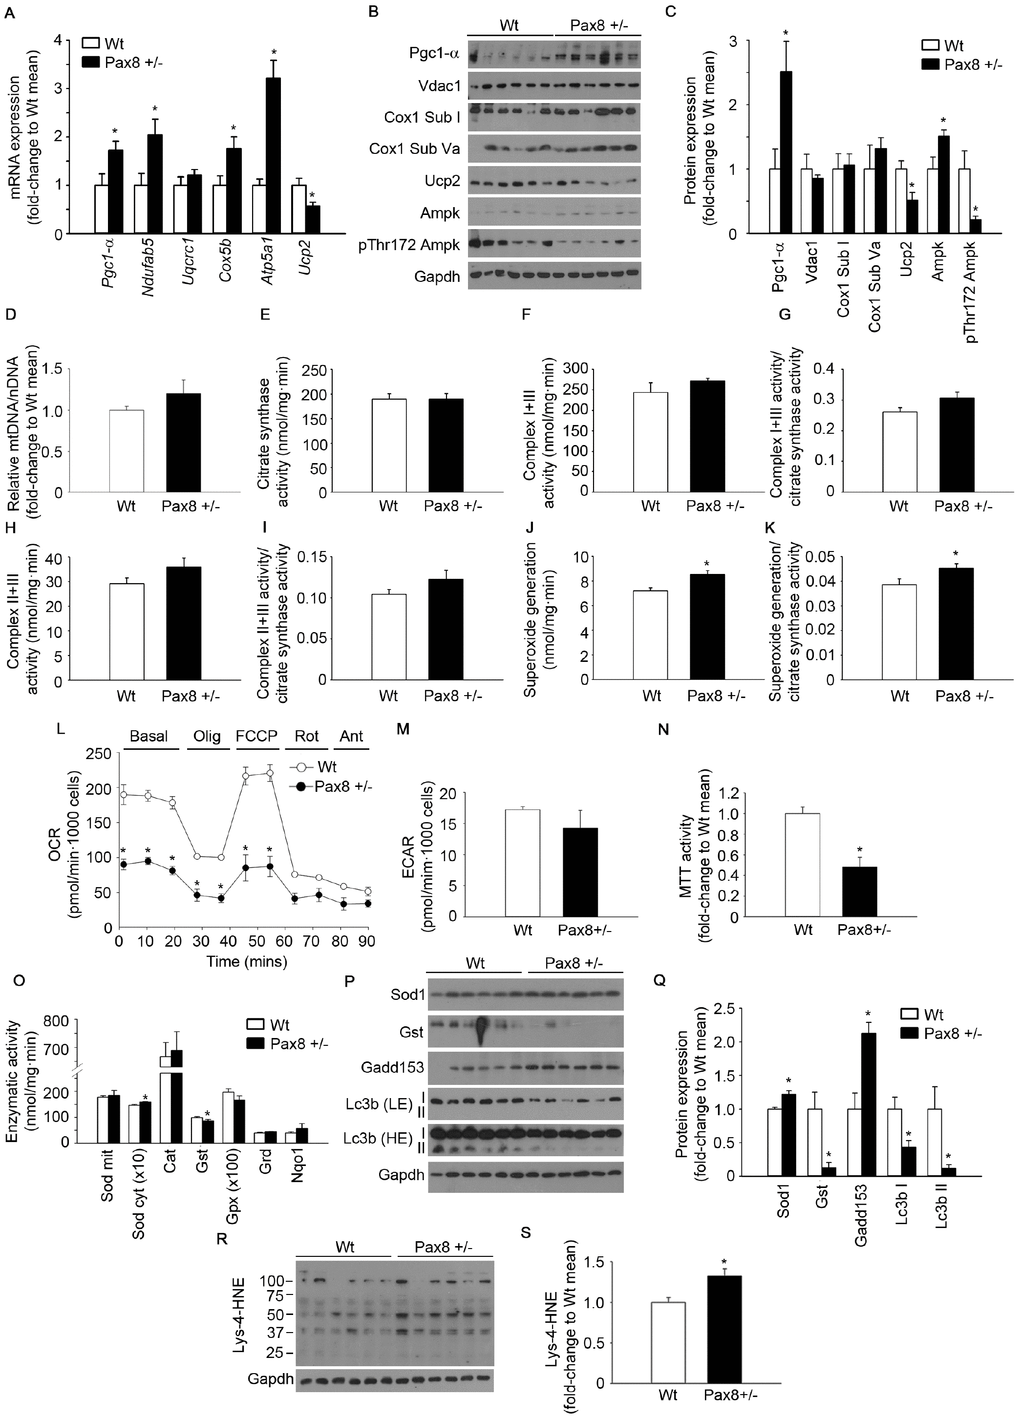 Mild hypothyroidism produces mitochondrial dysfunction and accumulation of oxidative damage in Pax8 +/- mice. (A) mRNA expression of genes involved in mitochondrial biogenesis and mitochondrial function in liver. Pgc1-α: n = 6 per group. Ndufab5 = n = 6 per group. Uqcrc1: n = 6 per group. Cox5b: n = 6 per group. Atp5a1: n = 5 Wt, n = 6 Pax8 +/-. Ucp2: n = 5 per group. (B) Western blots showing expression levels of proteins involved in mitochondrial biogenesis/function as well as Ampk and its phosphorylated isoform in liver lysates. n = 6 per group. (C) Densitometric analysis of western blots shown in panel B. n = 6 per group. (D) Relative mitochondrial DNA content in liver isolations. n = 6 per group. (E) Citrate synthase activity in liver extracts. n = 6 per group. (F) Complex I+III activity in liver extracts. n = 6 per group. (G) Complex I+III activity corrected by citrate synthase activity in liver extracts. n = 6 per group. (H) Complex II+III activity in liver extracts. n = 6 per group. (I) Complex II+III activity corrected by citrate synthase activity in liver extracts. n = 6 per group. (J) Superoxide generation in mitochondrial complexes in liver extracts. n = 6 per group. (K) Superoxide generation in mitochondrial complexes corrected by citrate synthase activity in liver extracts. n = 6 per group. (L) Oxygen consumption rate in primary hepatocytes. n = 3 per group. (M) Extracellular acidification rate in primary hepatocytes. n = 3 per group. (N) MTT test to determine the metabolic activity (NADH-oxidase) of primary hepatocytes. n = 4 per group. (O) Antioxidant enzymatic activities in liver lysates. Sod mit: n = 6 per group. Sod cyt: n = 5 per group. Cat: n = 5 Wt, n = 6 Pax8 +/-. Gst: n = 5 per group. Gpx: n = 5 per group. Grd: n = 6 Wt, n = 5 Pax8 +/-. Nqo1: n = 5 Wt, n = 6 Pax8 +/-. Sod mit: Sod mitochondrial. Sod cyt: Sod cytosolic. (P) Western blots showing expression levels of antioxidant, stress response and autophagy induction proteins in liver lysates. LE = Low exposure. HE = High exposure. n = 6 per group. (Q) Densitometric analysis of western blots shown in panel P. (R) Western blot showing Lys-4-HNE staining in liver extracts. n = 6 per group. (S) Densitometric analysis of the western blot shown in panel R. Mice were 9 month-old at the time of killing. Data are represented as the mean ± SEM. * p-value 